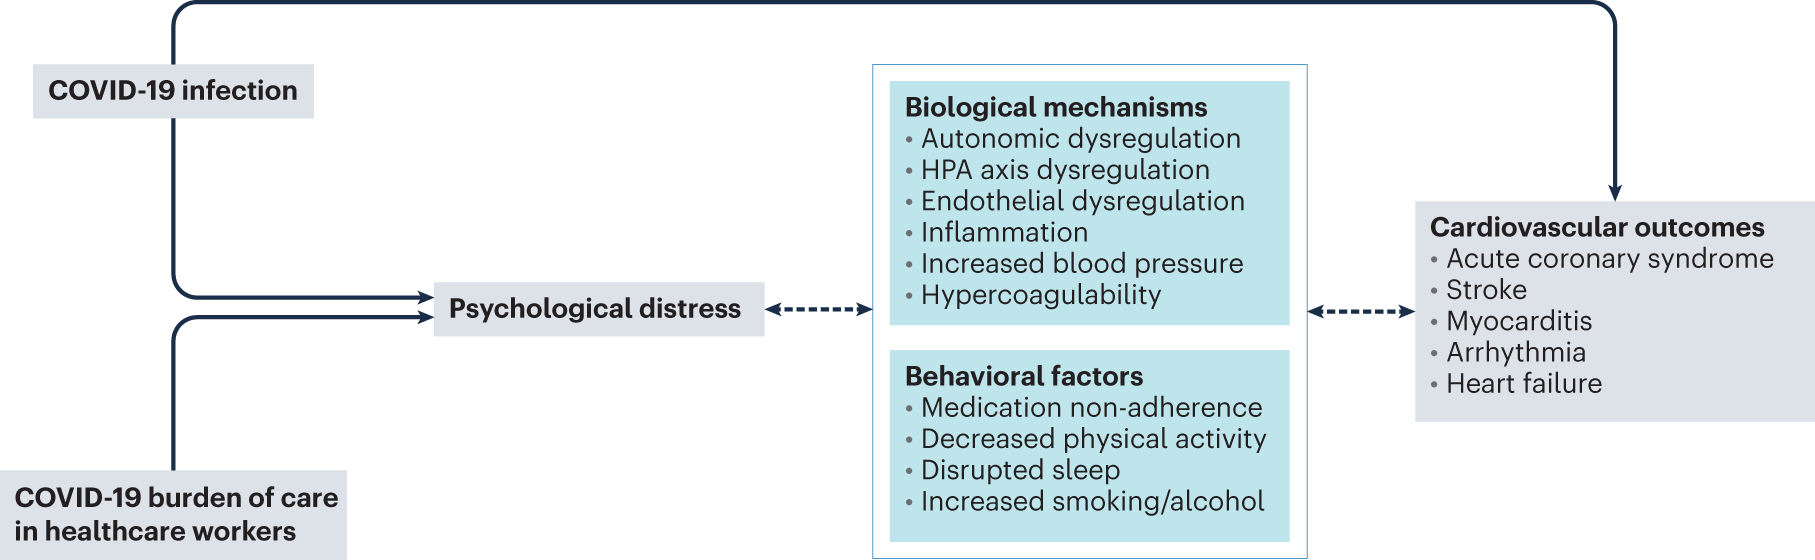 COVID-19 and the amplification of cardiovascular risk by